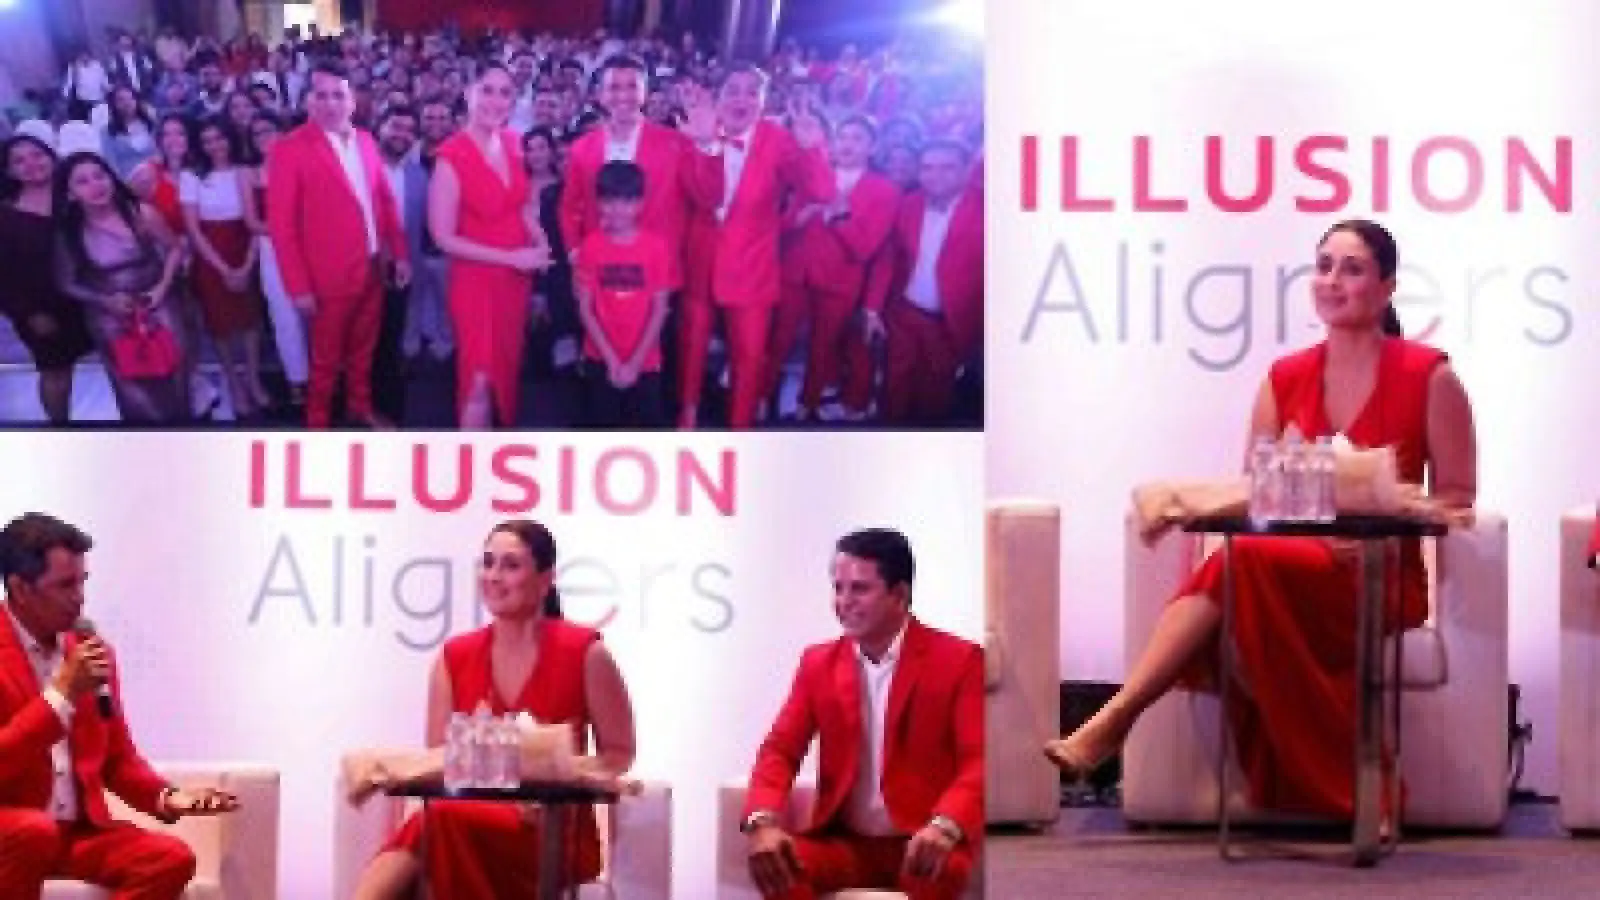 Kareena Kapoor Khan Dazzles at Illusion Aligners' Grand Event, Aligning Dentistry with Innovation